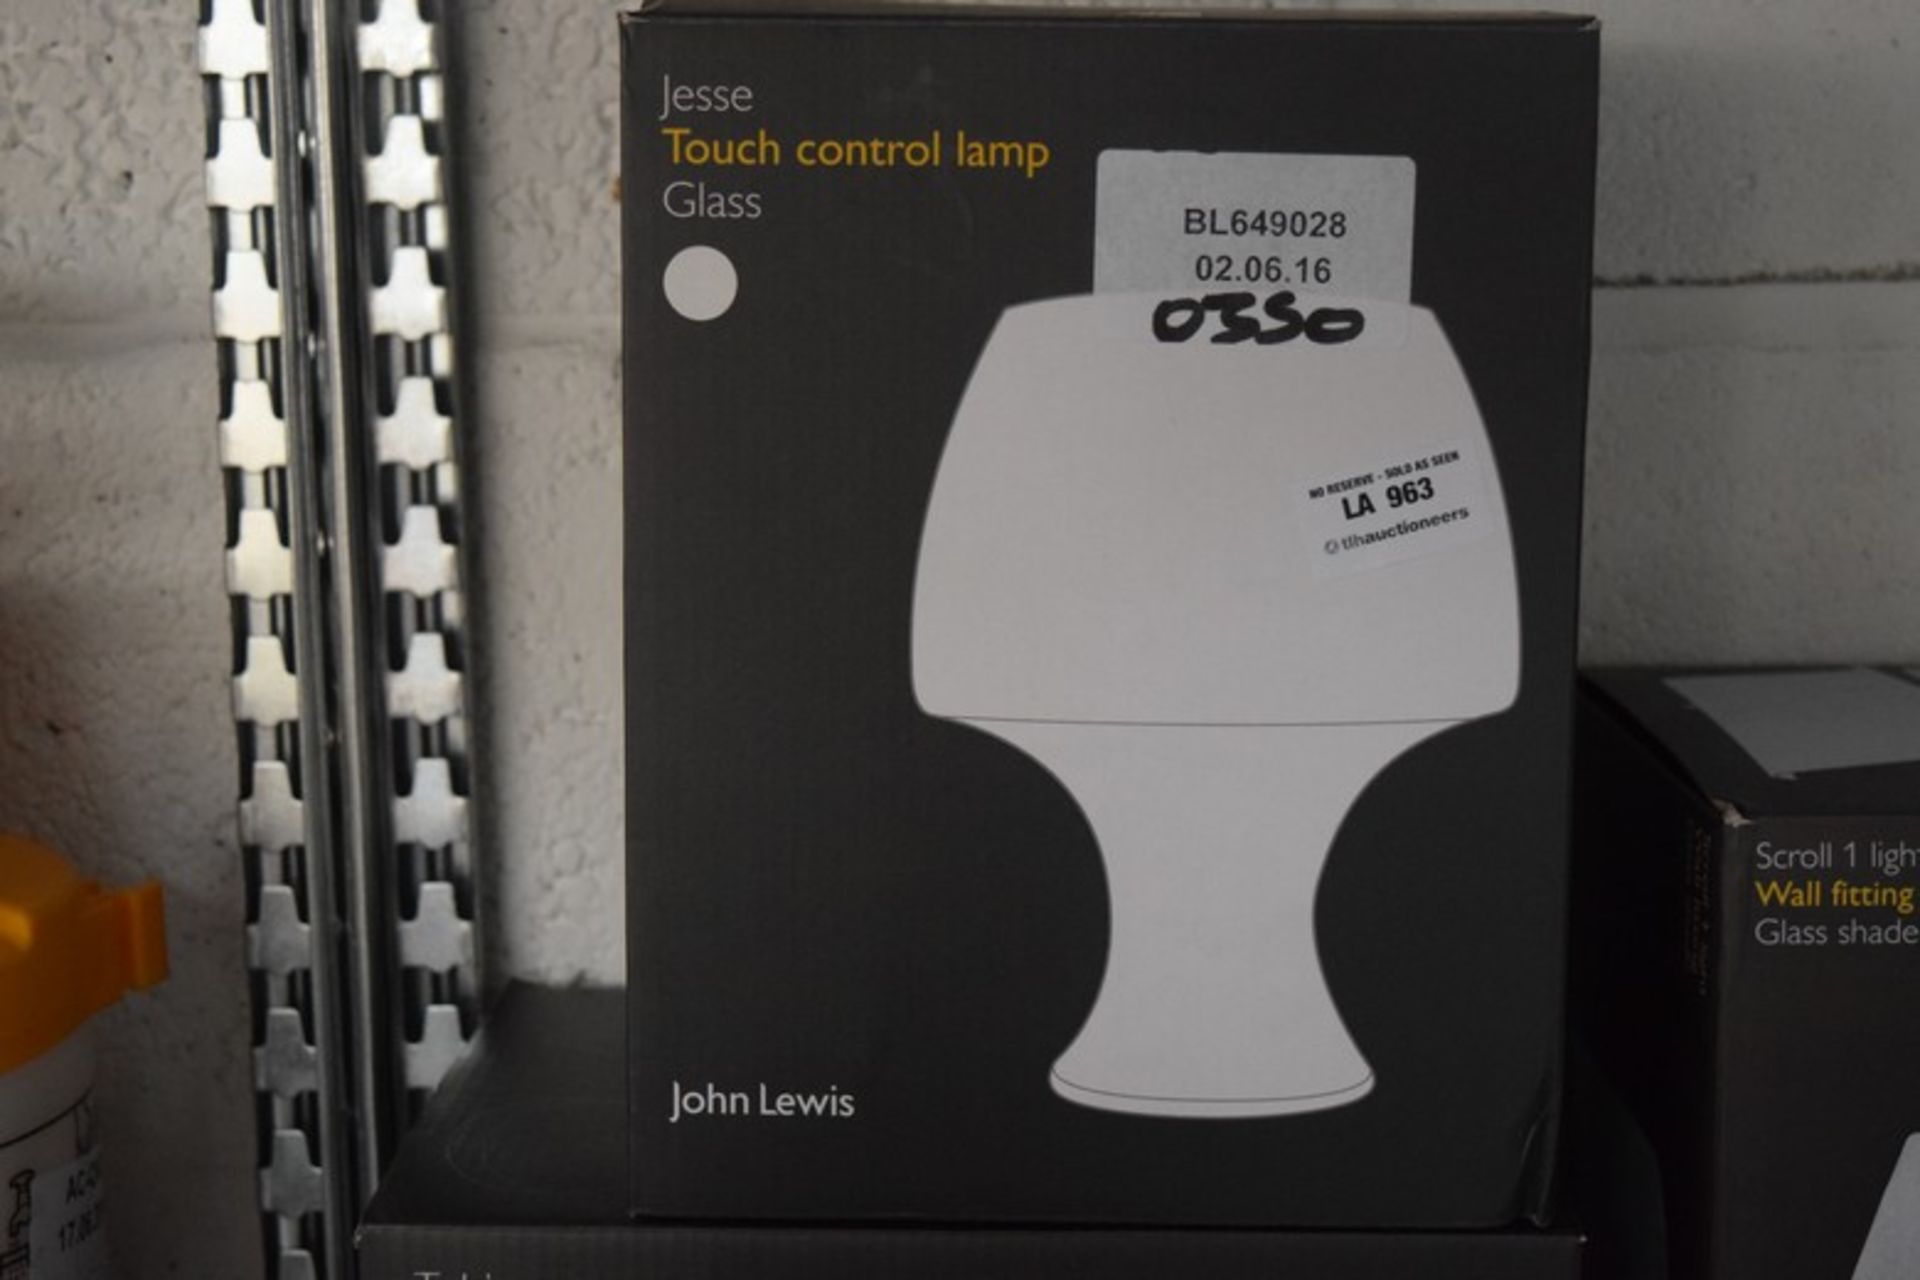 1 X BOXED JESSE GLASS TOUCH CONTROL LAMP RRP £35 02.06.2016